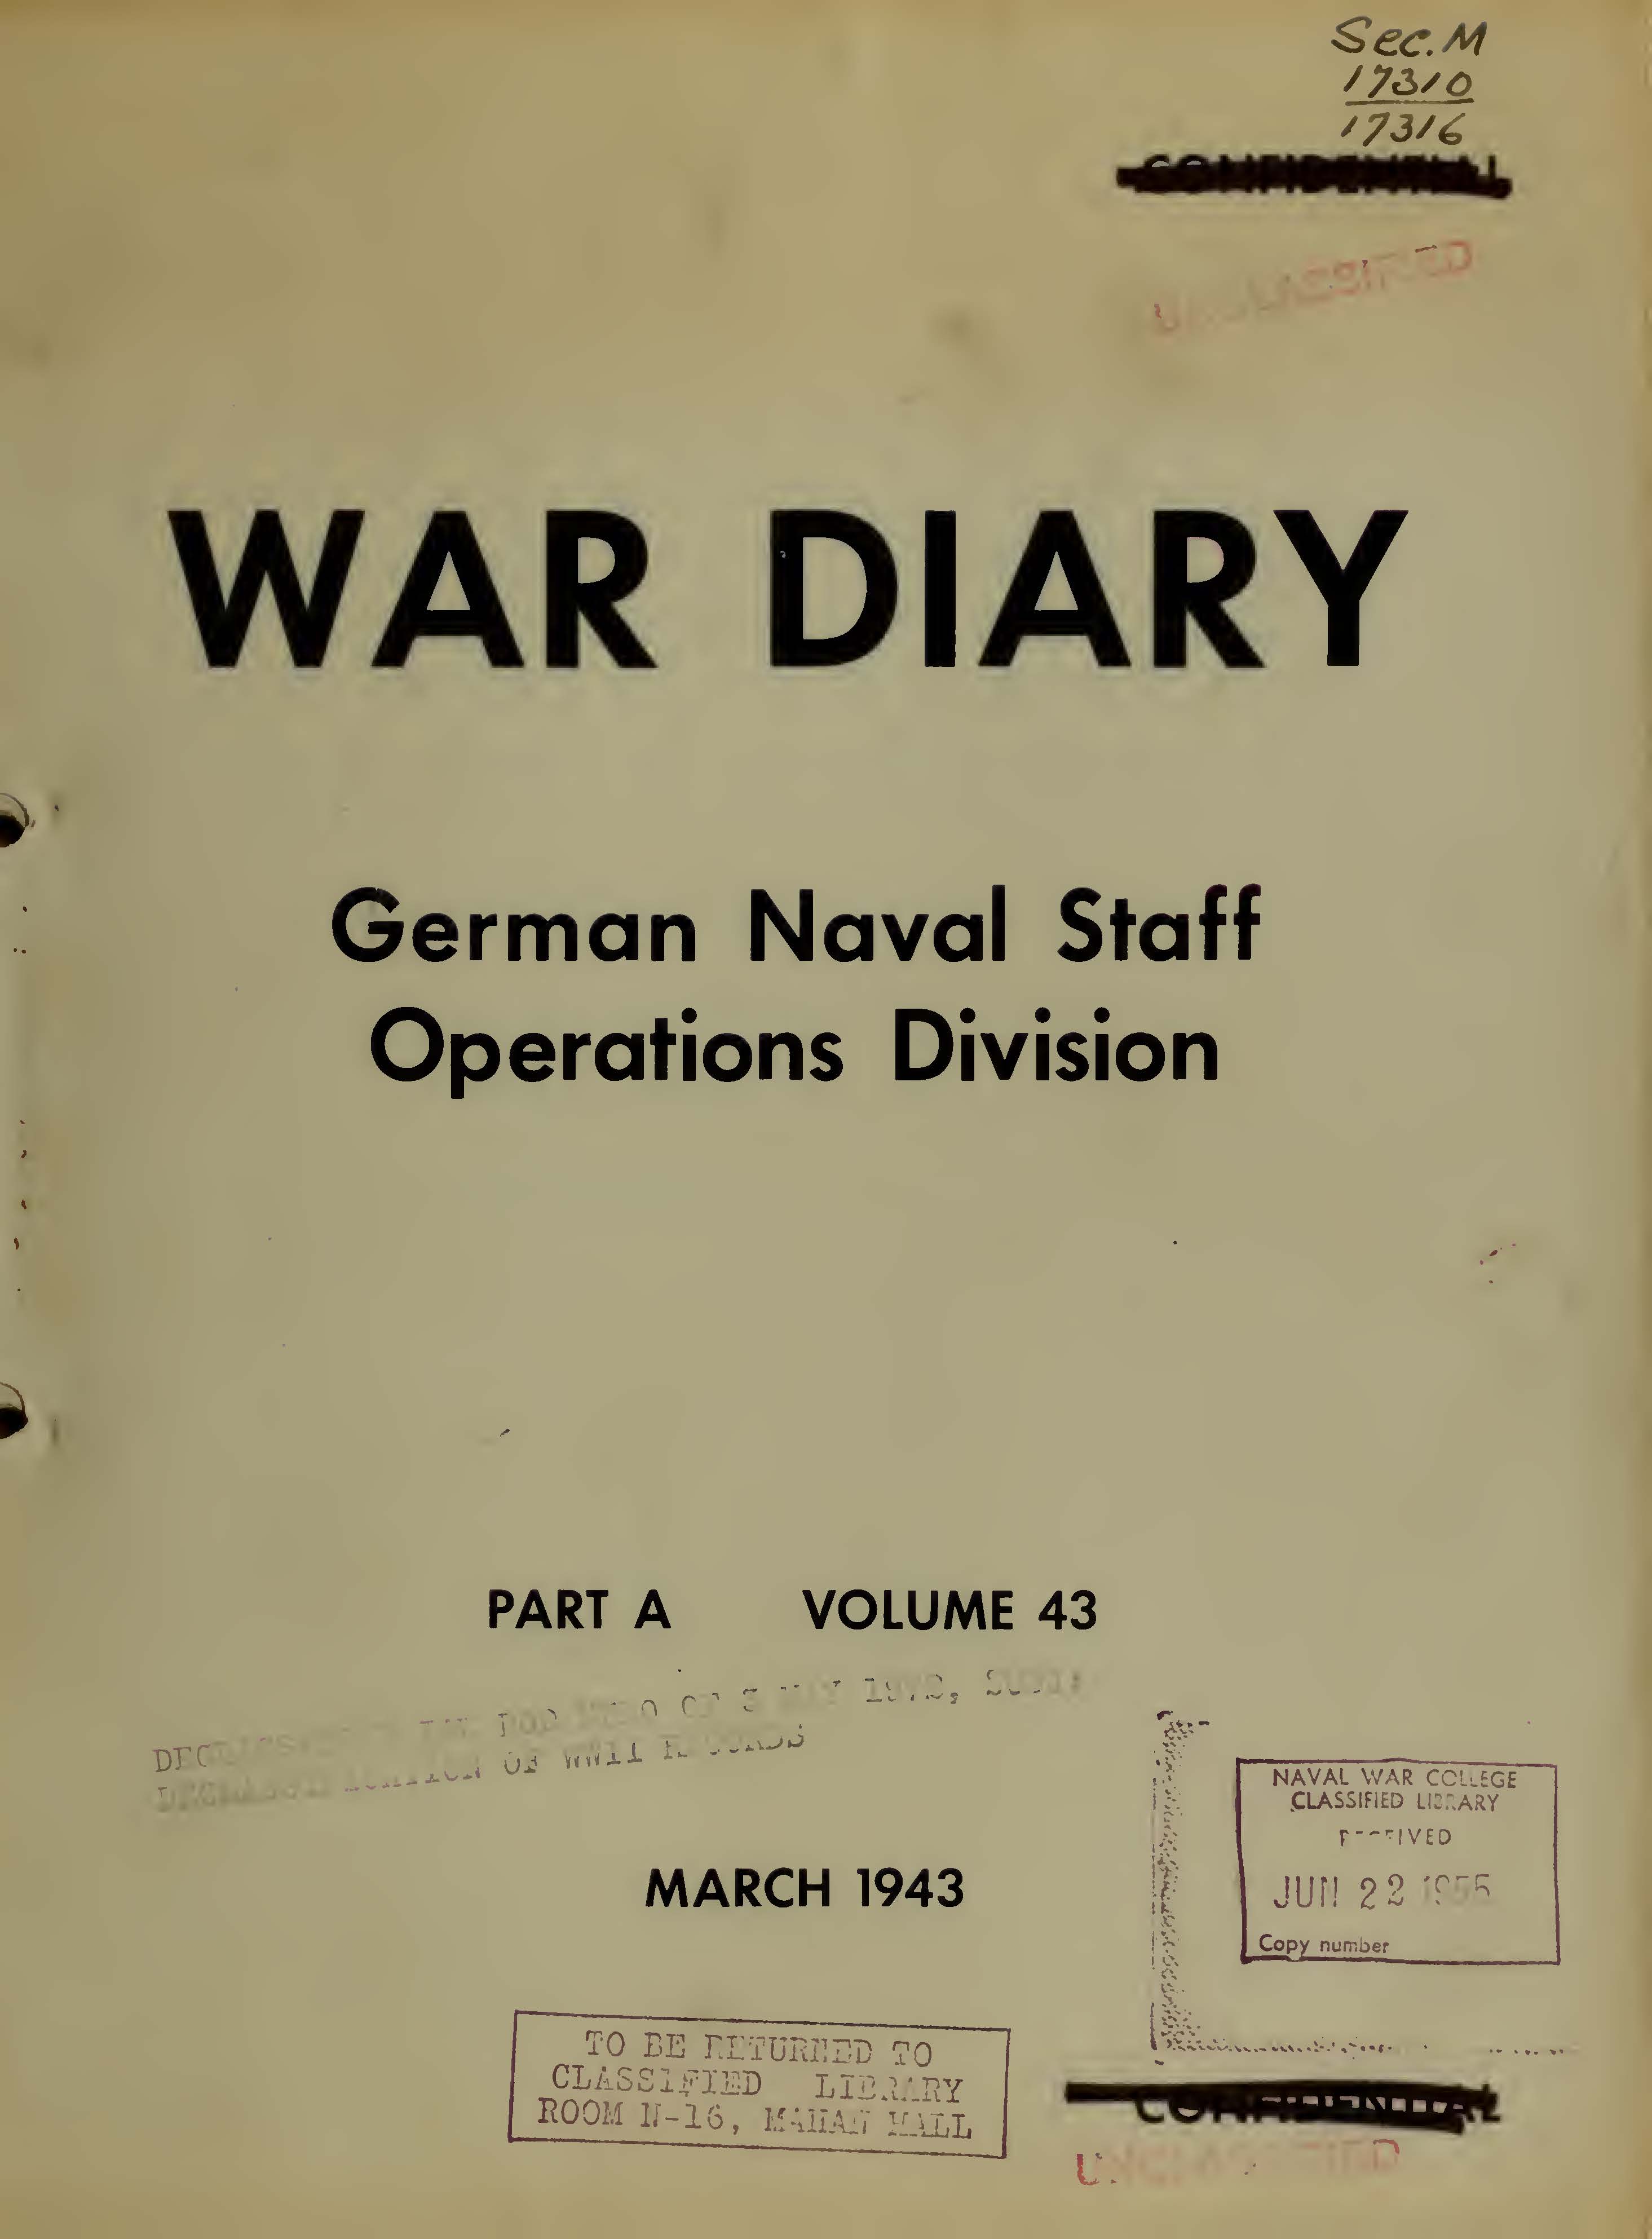 War Diary of German Naval Staff (Operations Division) Part A, Volume 43, March 1943